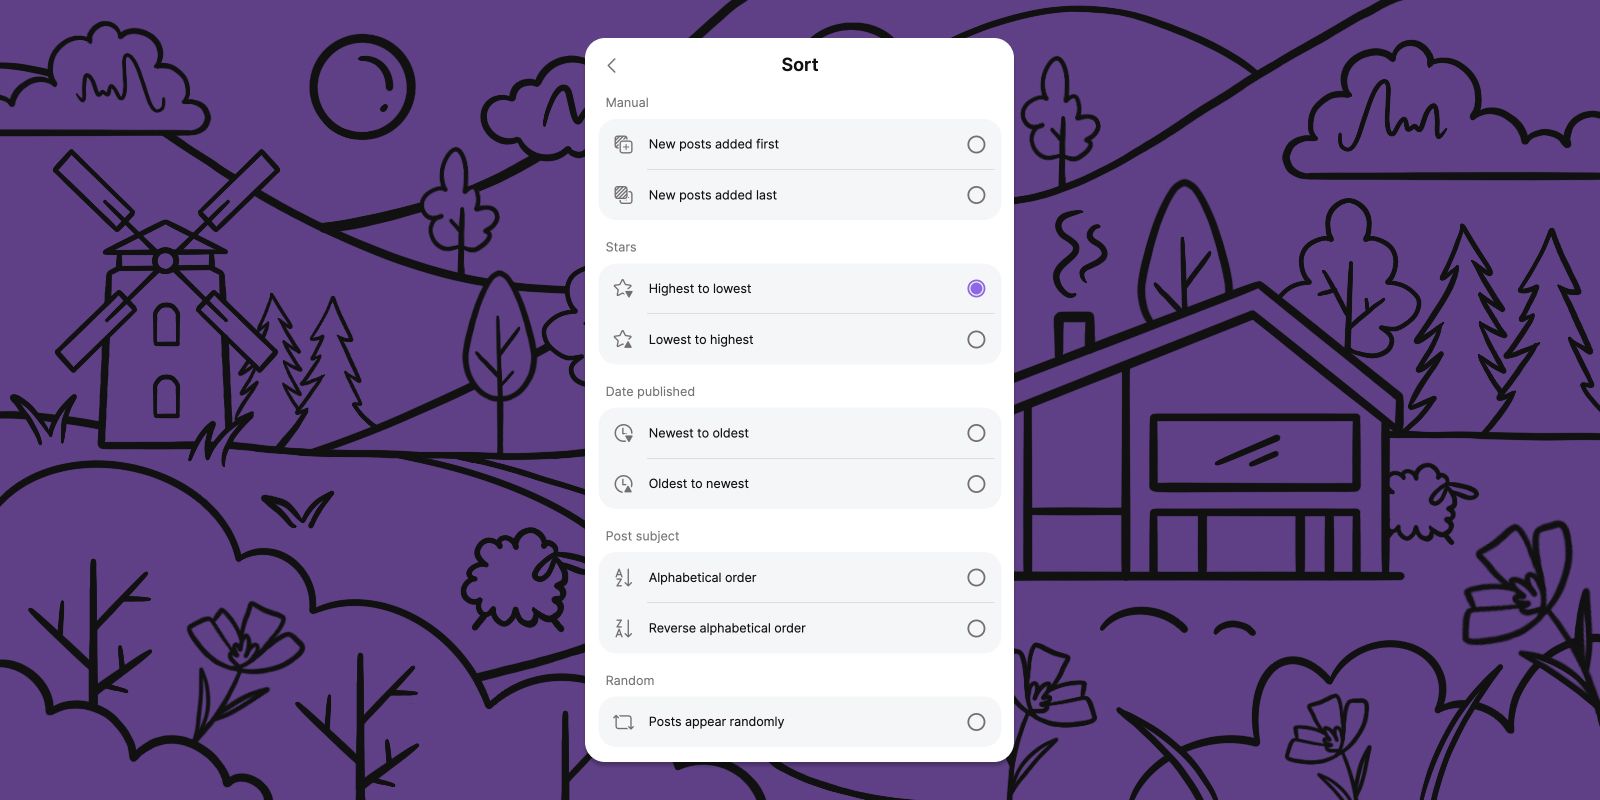 A screenshot of the sorting options atop a purple background